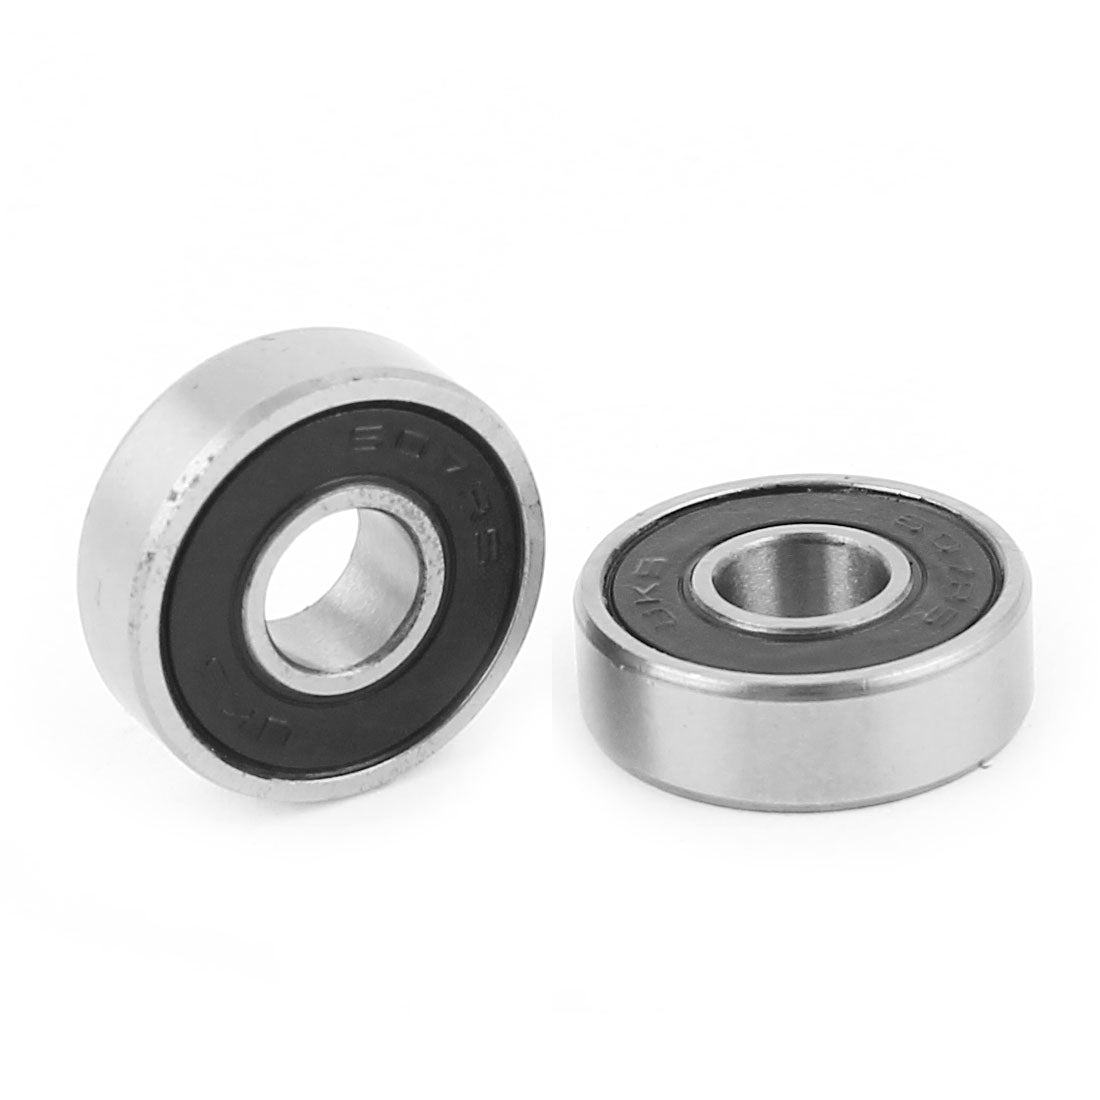 uxcell Uxcell Replacement 607-2RS Roller-Skating Deep Groove Ball Bearing 19mm x 7mm x 6mm 2Pcs